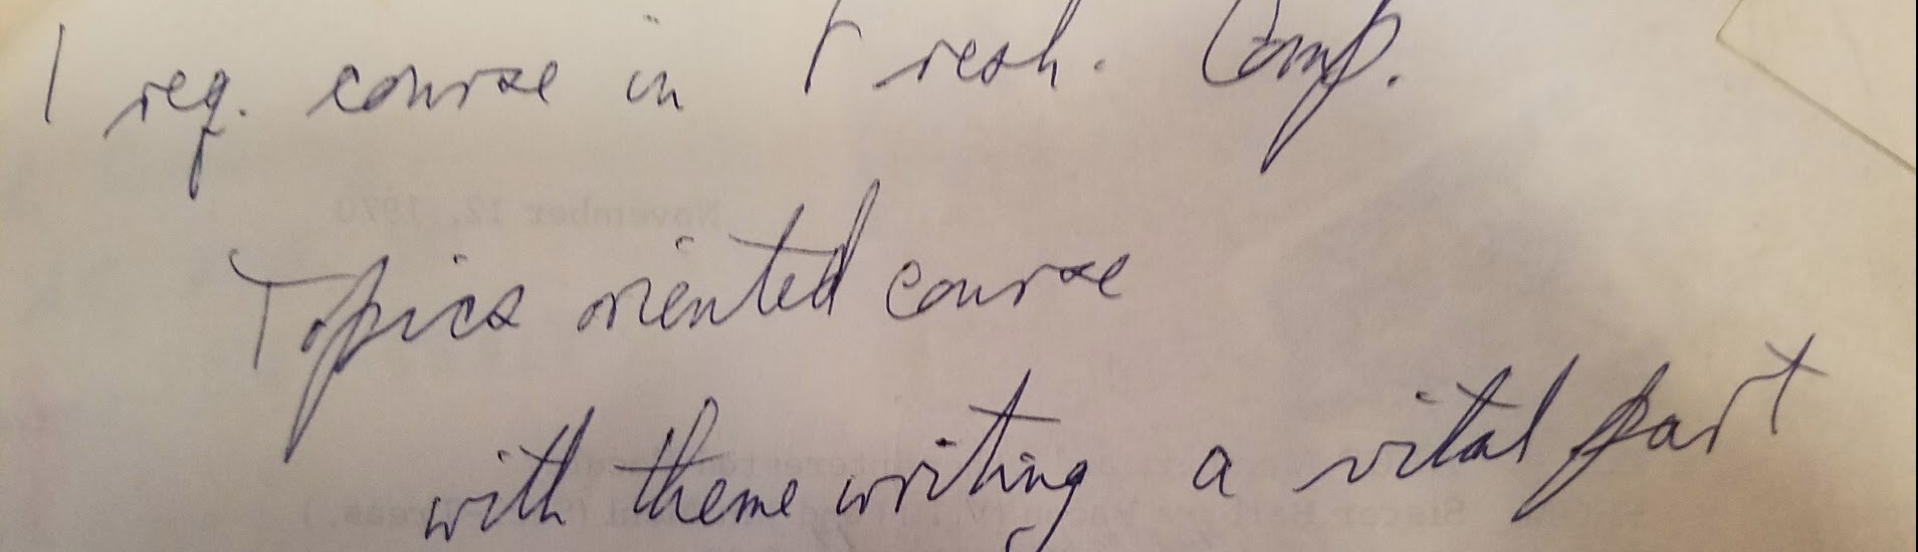 Handwritten note says: 1 req. course in Fresh, Comp. Topics oriented course with theme writing a vital part